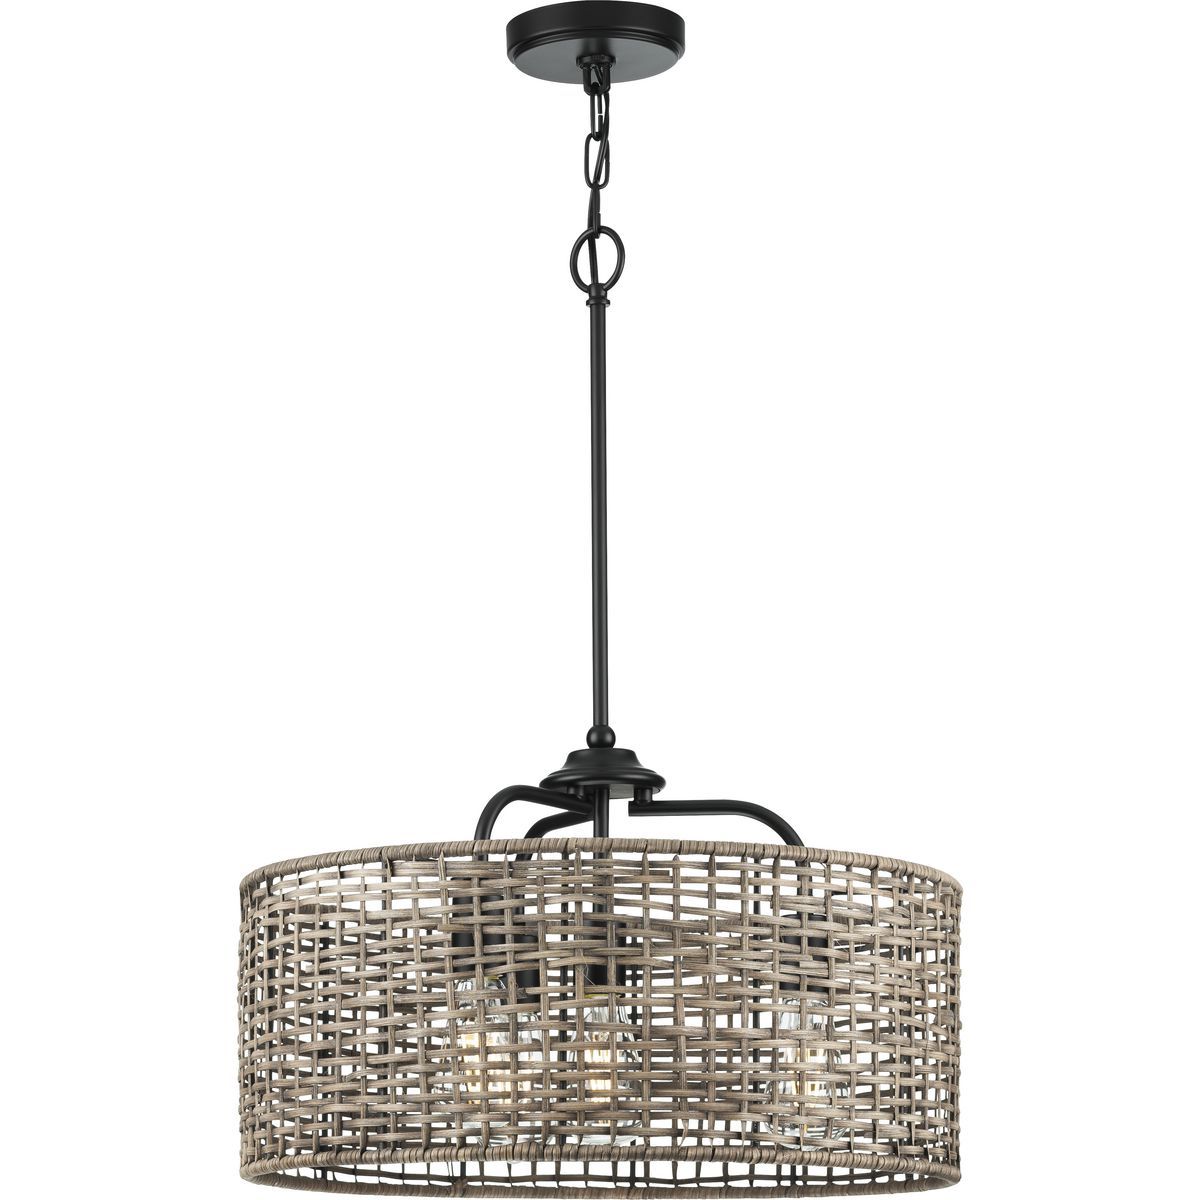 Lavelle Collection Four Light Matte Black And Mocha Finish Pertaining To Matte Black Four Light Chandeliers (View 11 of 15)